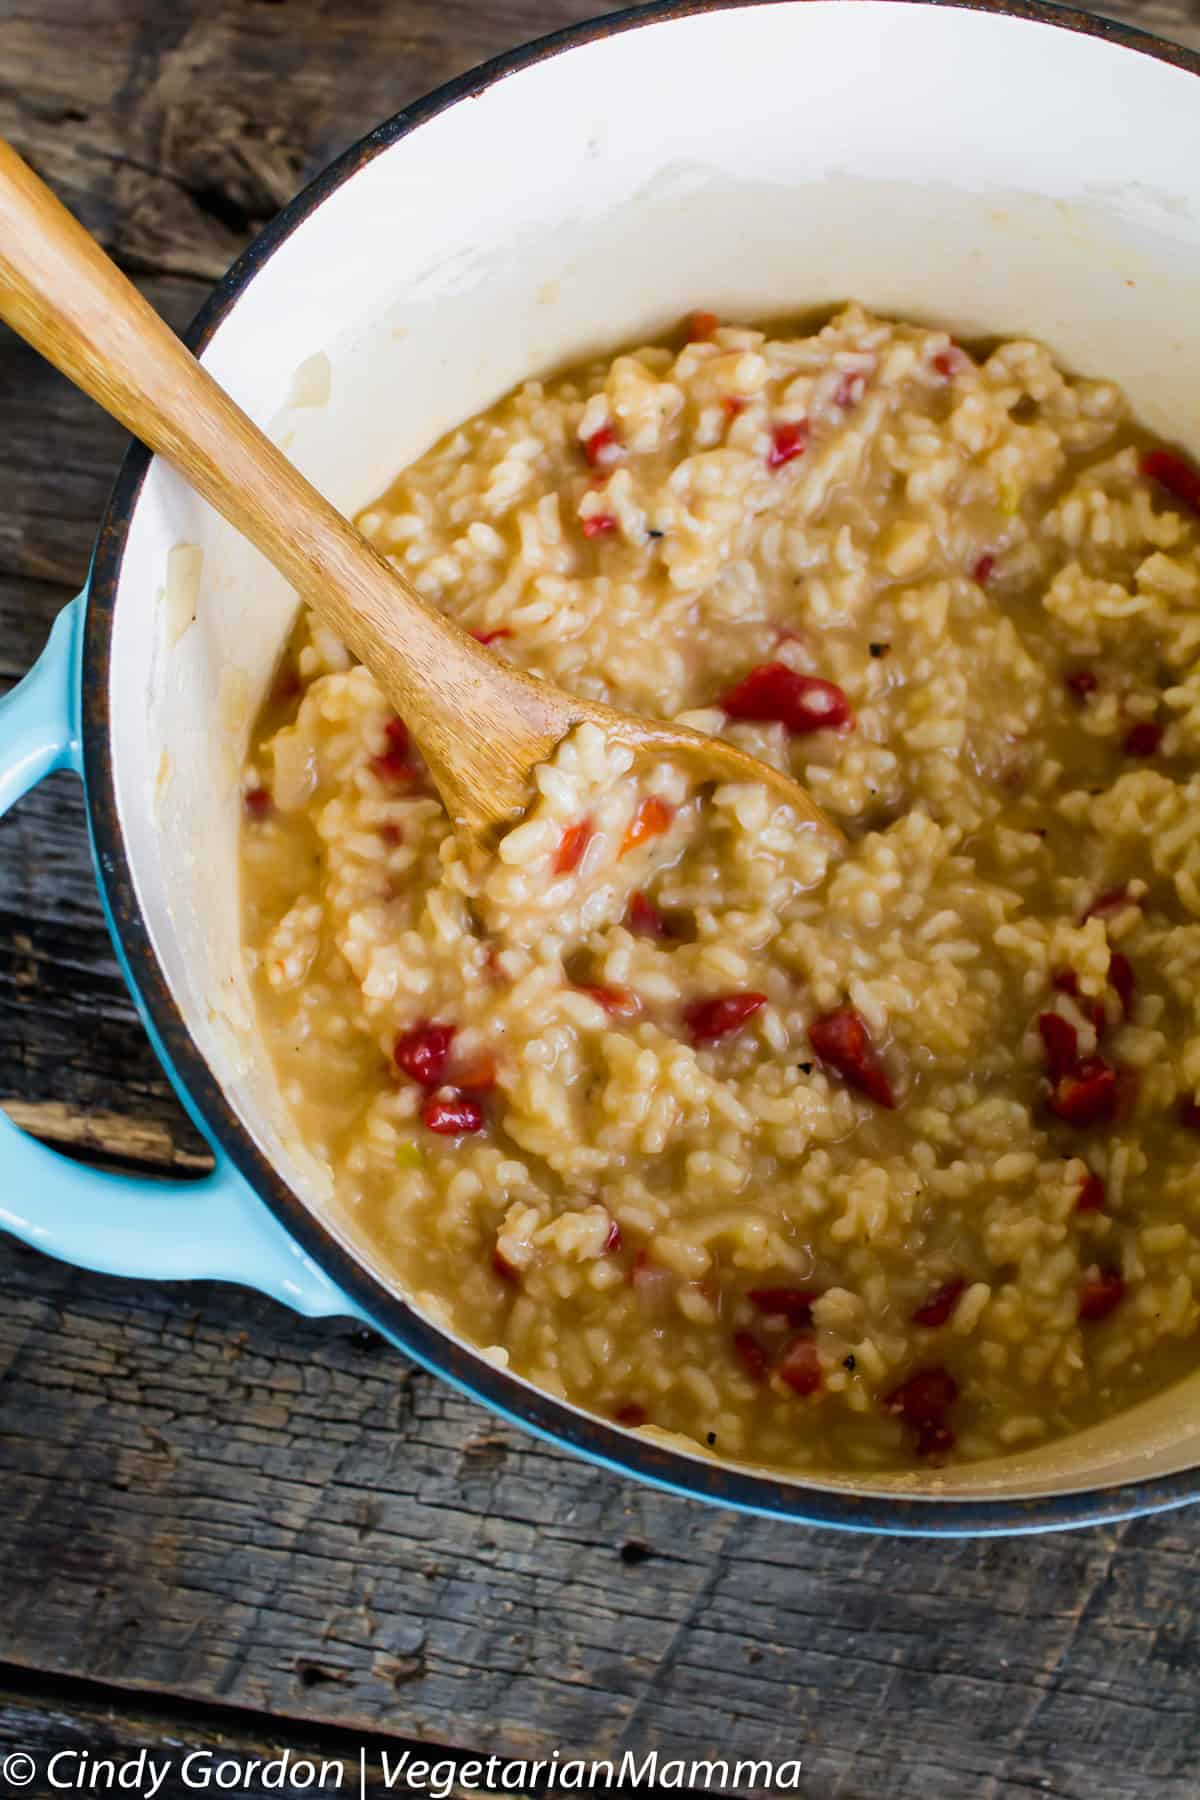 Hungry for risotto, this roasted red pepper risotto is amazing.